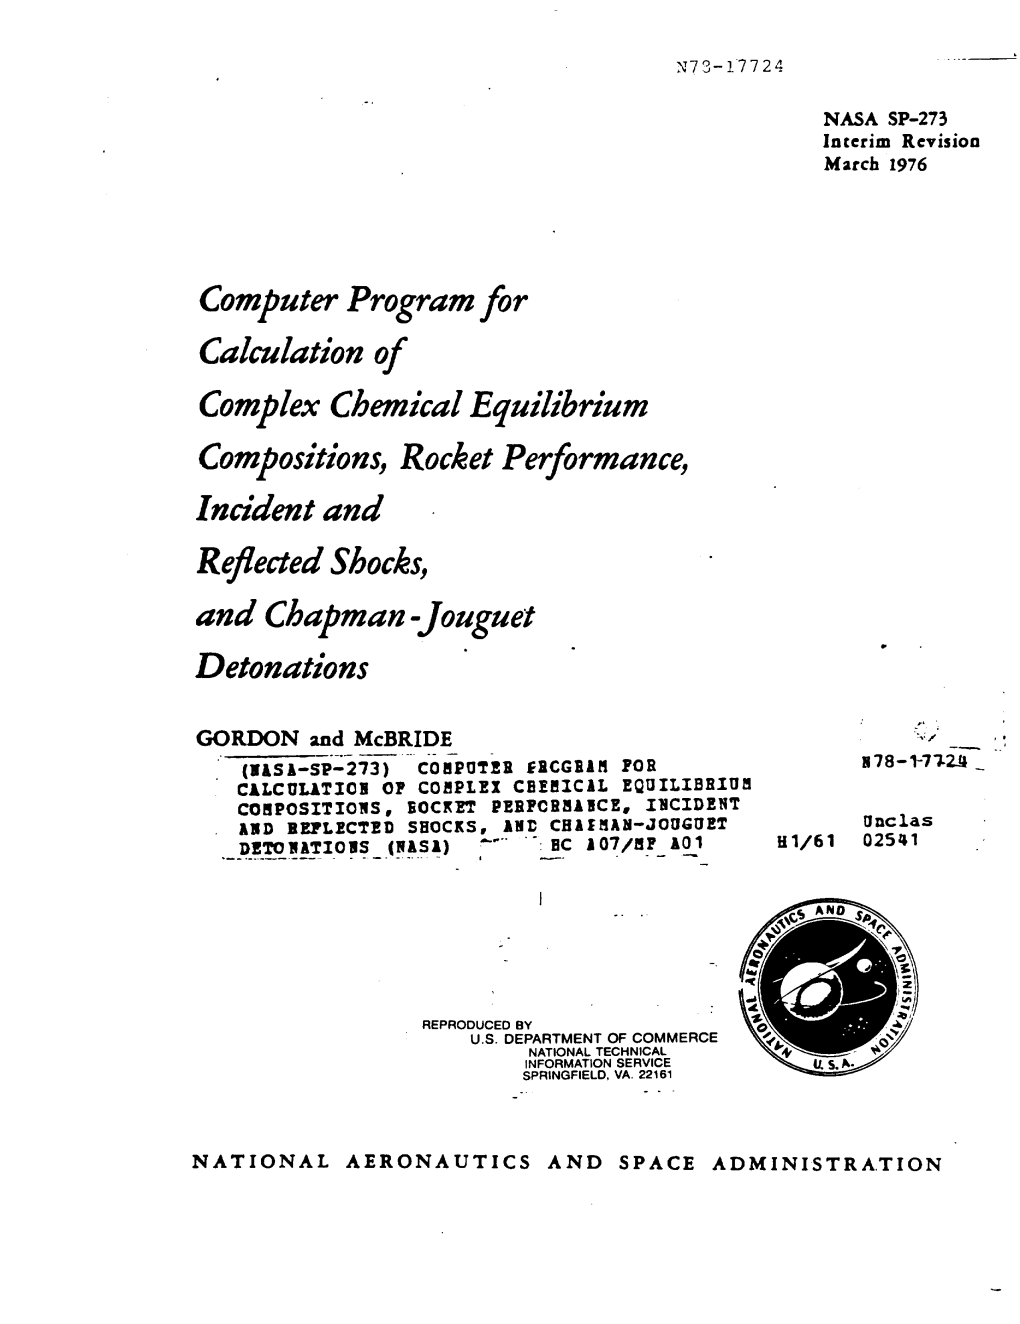 Computer Program for Calculation of Complex Chemical Equilibrium Compositions, Rocket Performance, Incident and R Efleaed Shocks, and Chapman-Jouguet Detonations